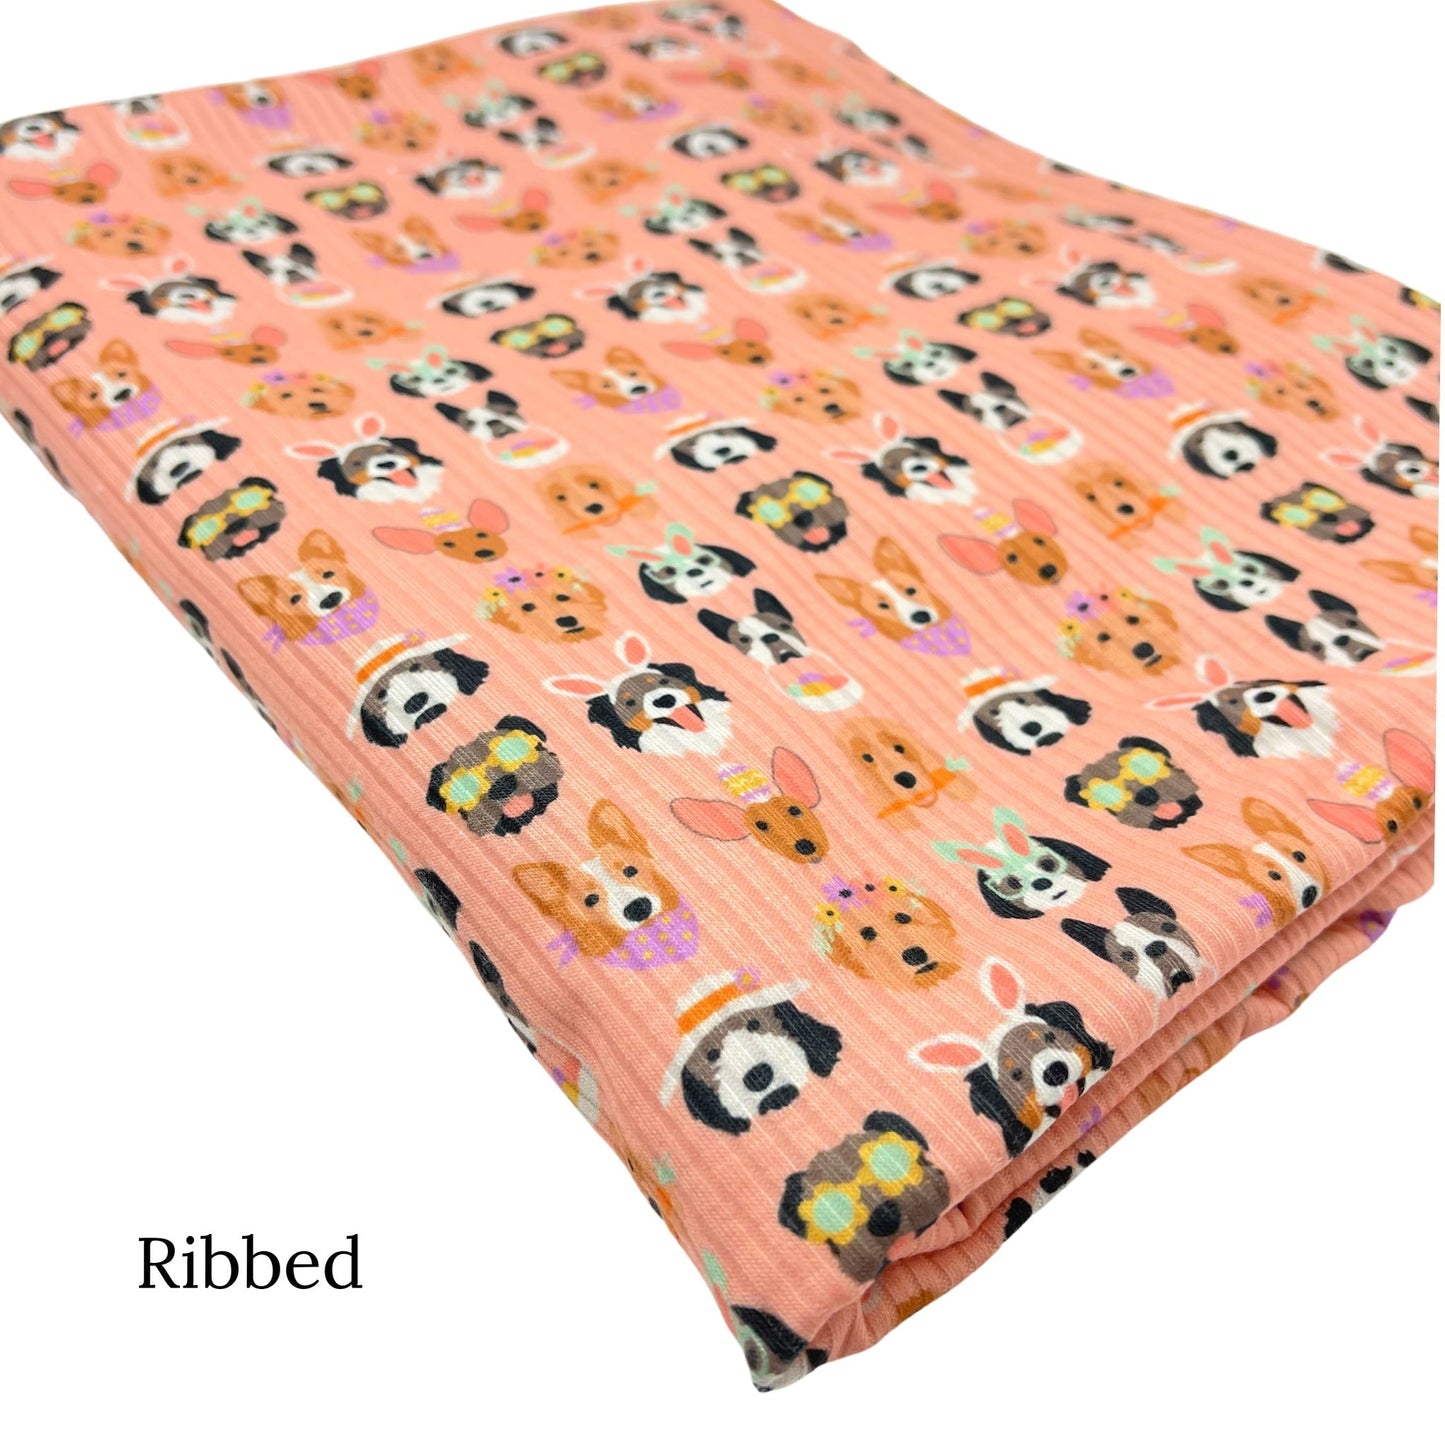 Folded light peachy pink ribbed fabric with Easter dogs pattern designed by Hey Cute Design.